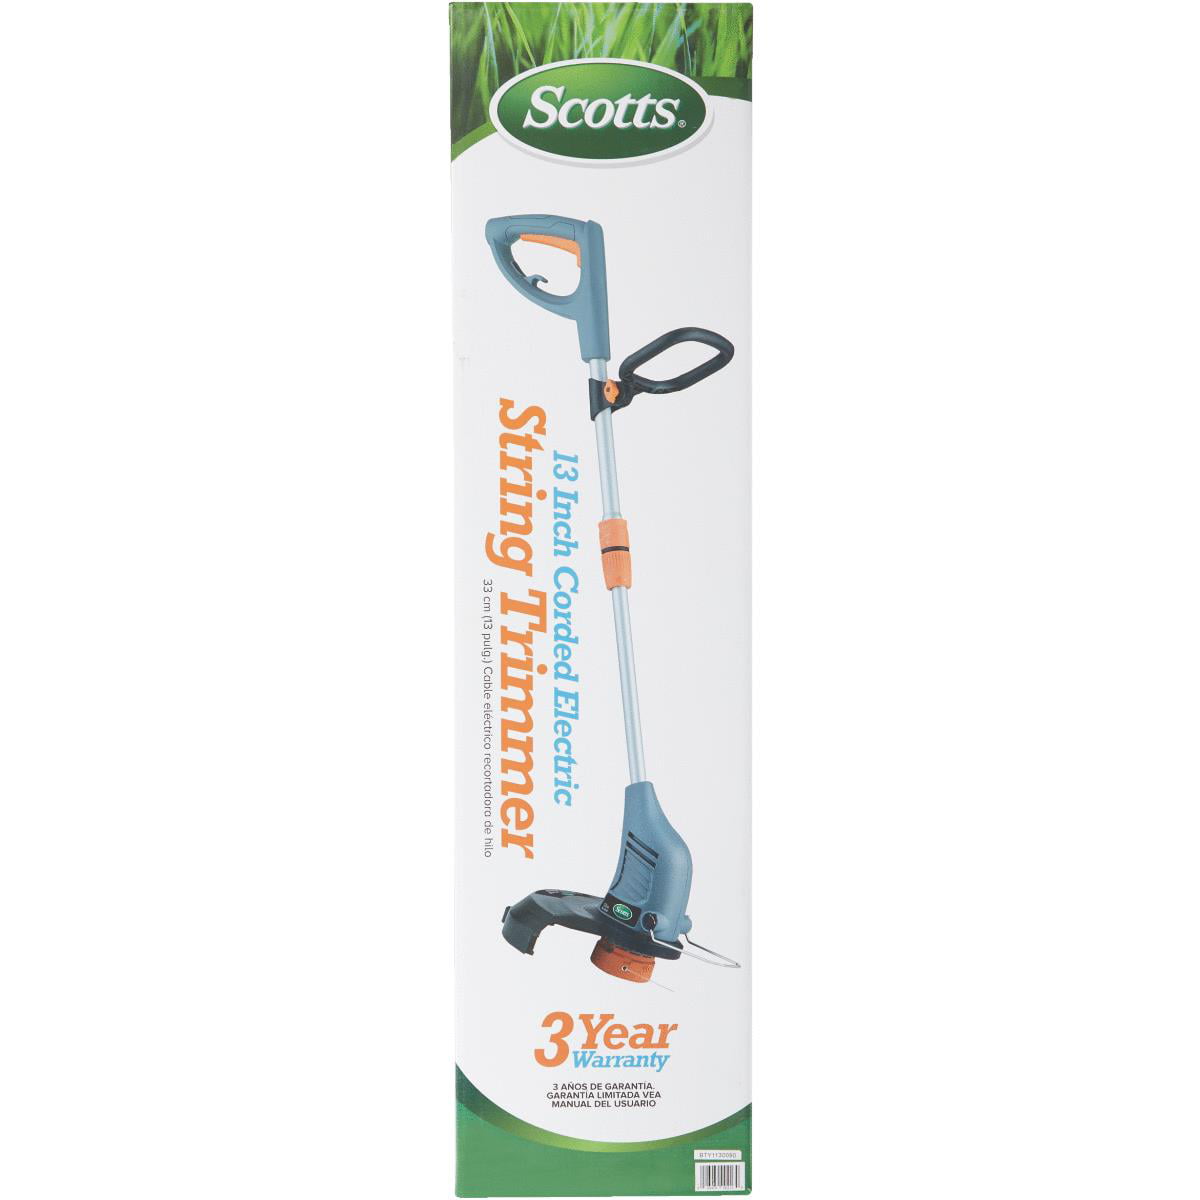 Scotts Outdoor Power Tools ST00213S 13-Inch 4-Amp Corded Electric String Trimmer